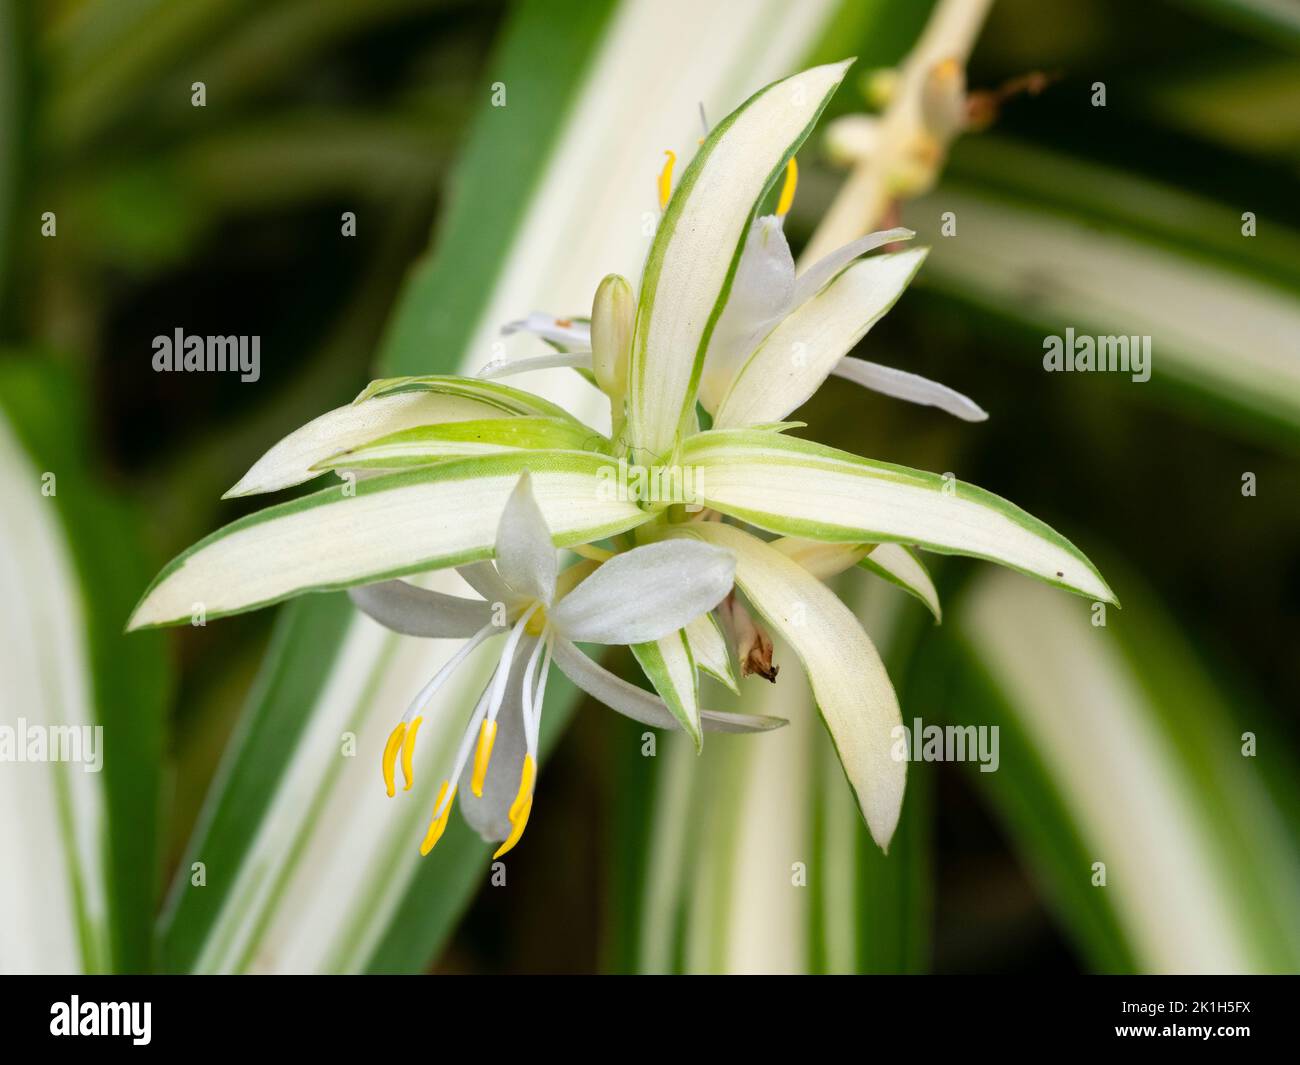 White flower and variegated evergreen foliage of a developing offset of the popular spider plant Chlorophytum comosum 'Variegatum' Stock Photo